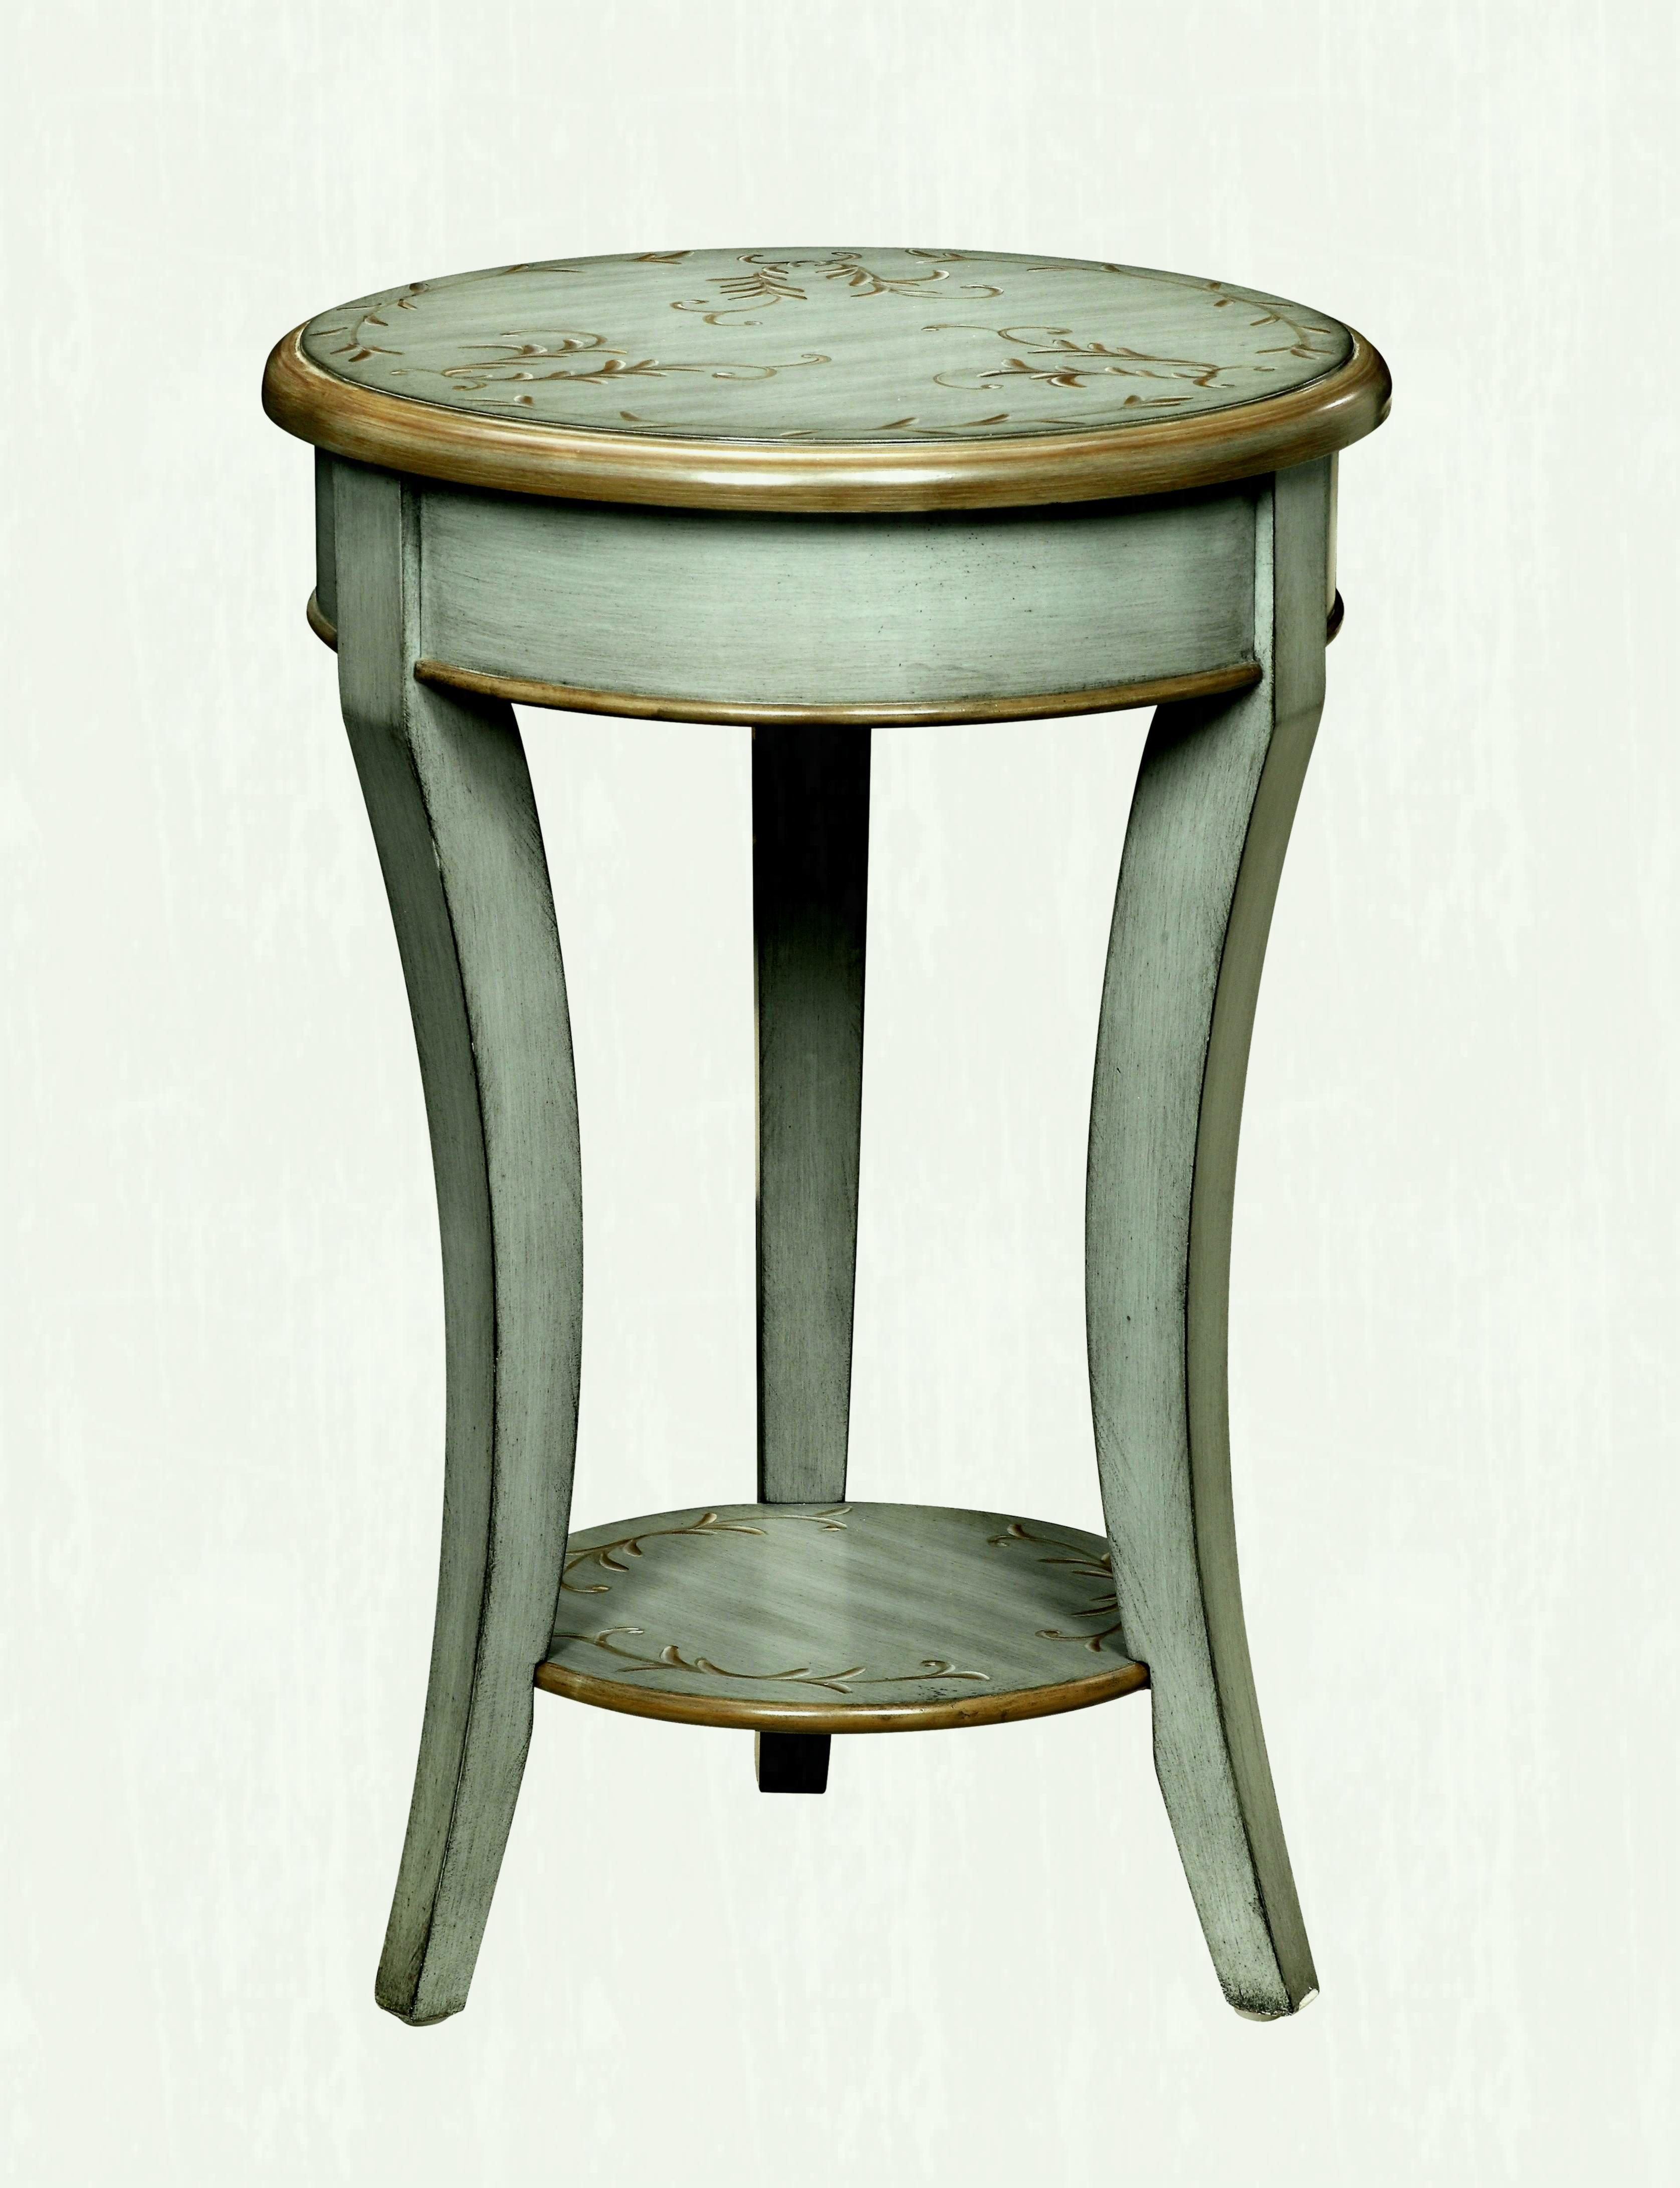 small round accent table for the bedroom lovely wood with drawer home decor interior design outside grills inch square tablecloth green furniture triangle end clear crystal lamp